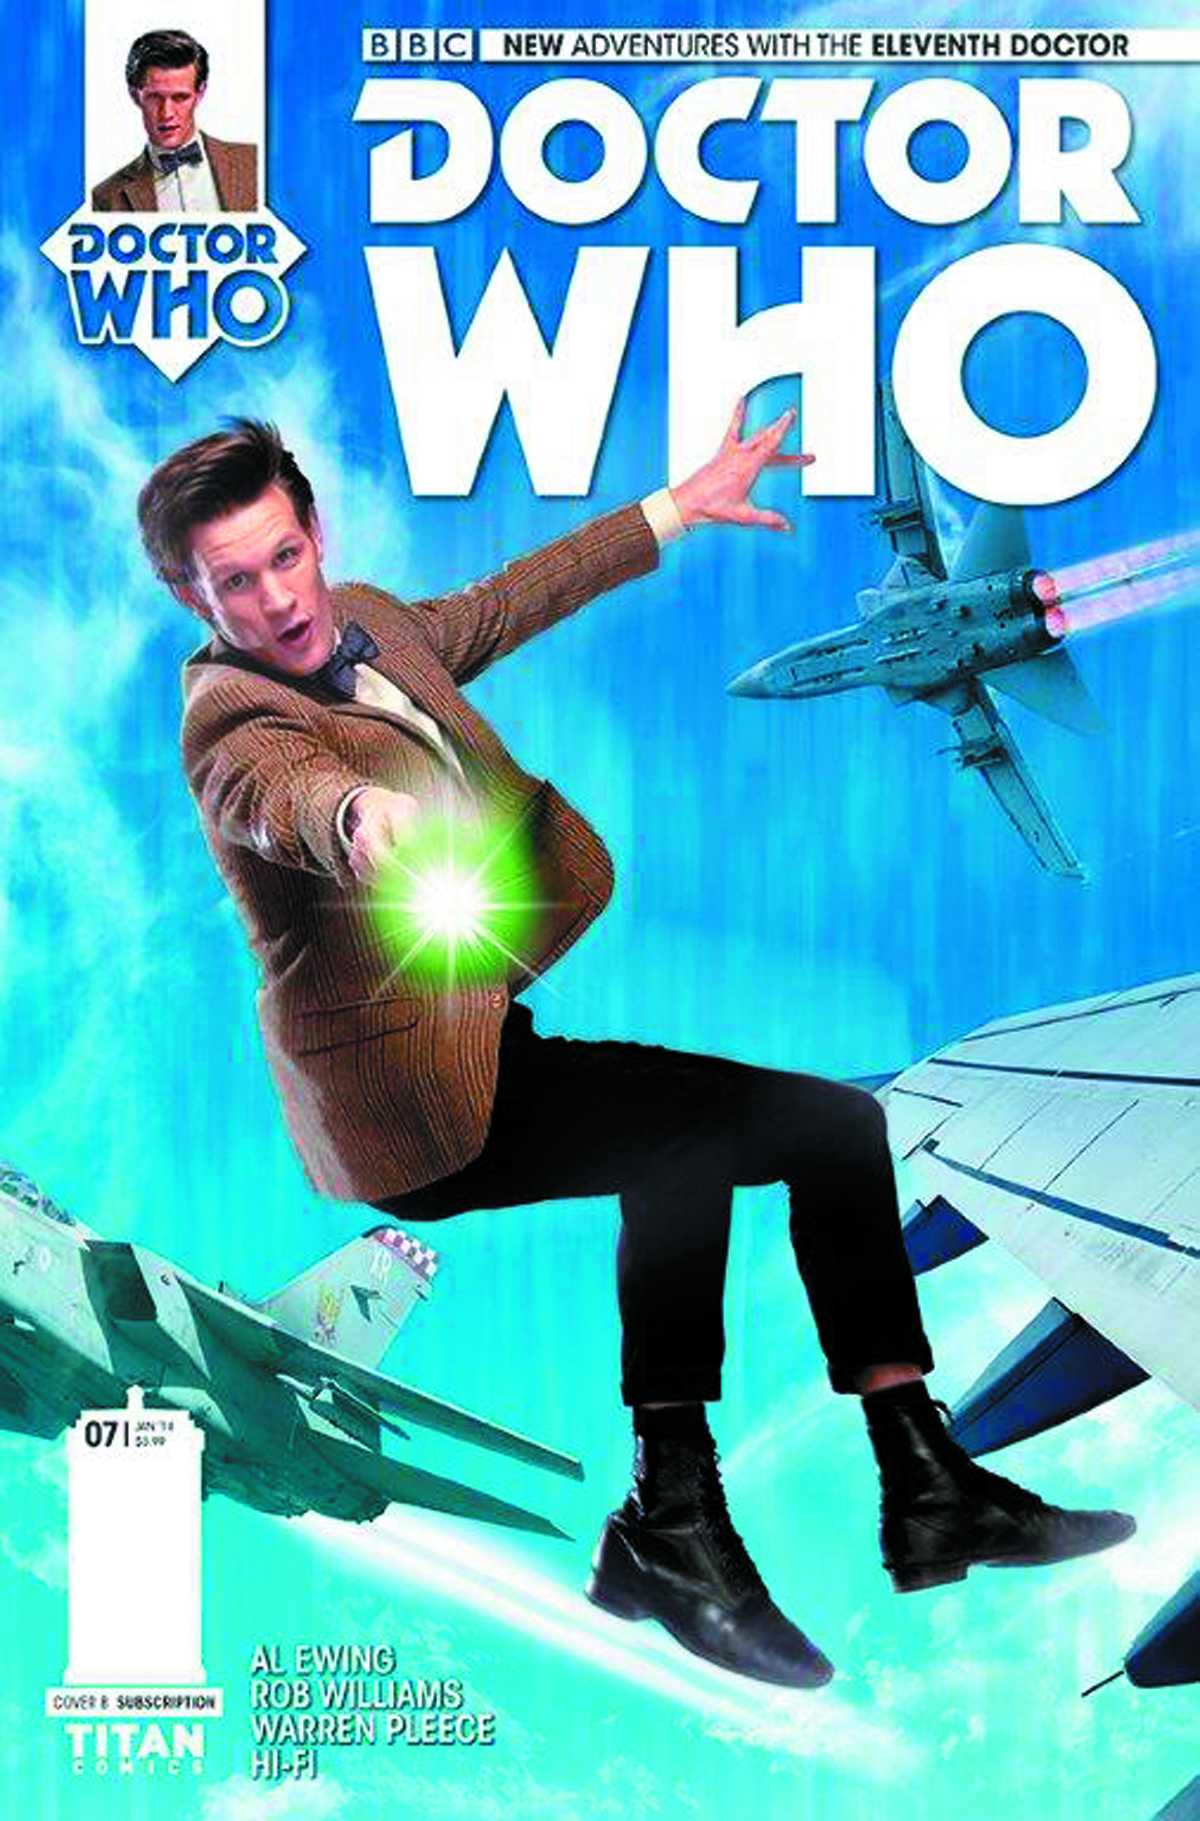 DOCTOR WHO 11TH #7 SUBSCRIPTION PHOTO